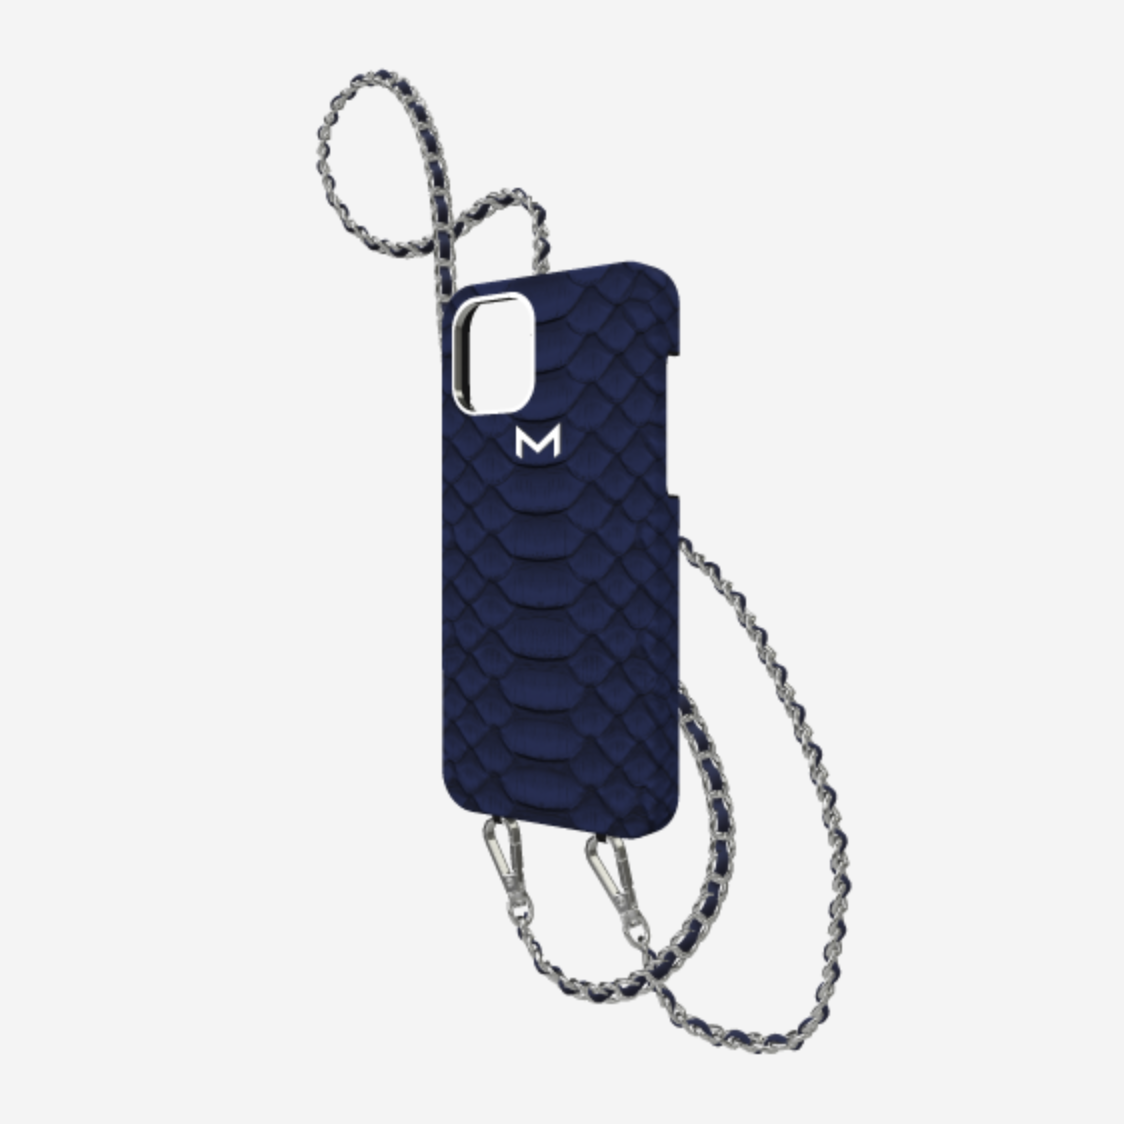 Necklace Case for iPhone 12 Pro Max in Genuine Python Navy Blue Steel 316 